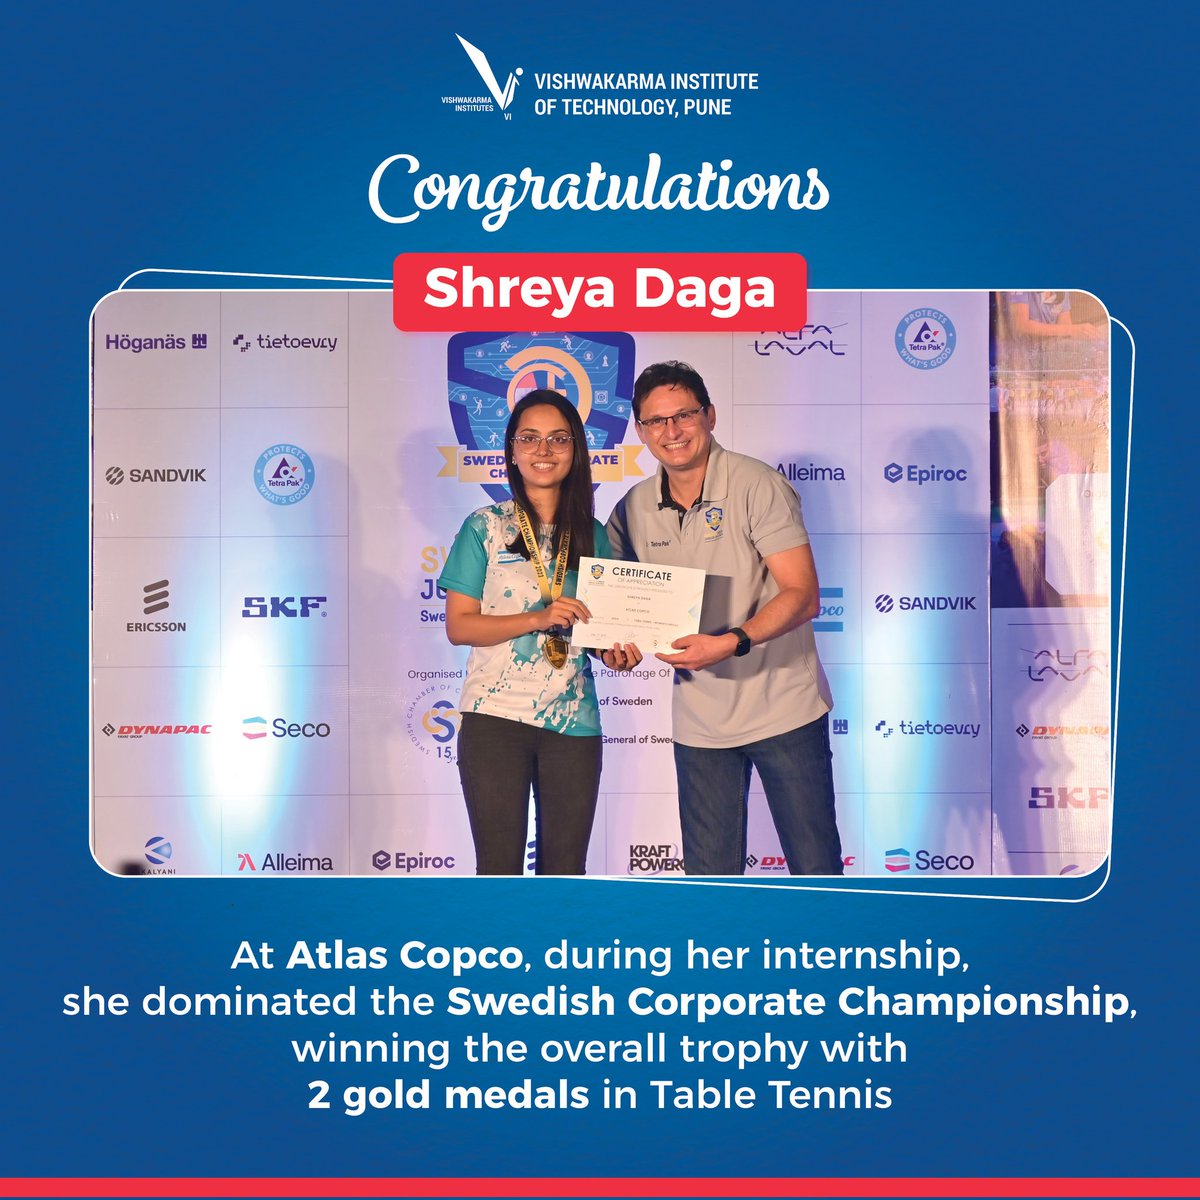 Interning at Atlas Copco, she dominated the Swedish Corporate Championship, clinching the overall trophy with 2 gold medals in Table Tennis!
#champion #goldmedal #tabletennis #winner #engineeringinstitute #engineeringstudents #engineeringcollege #engineering #VITPune #vitstudents